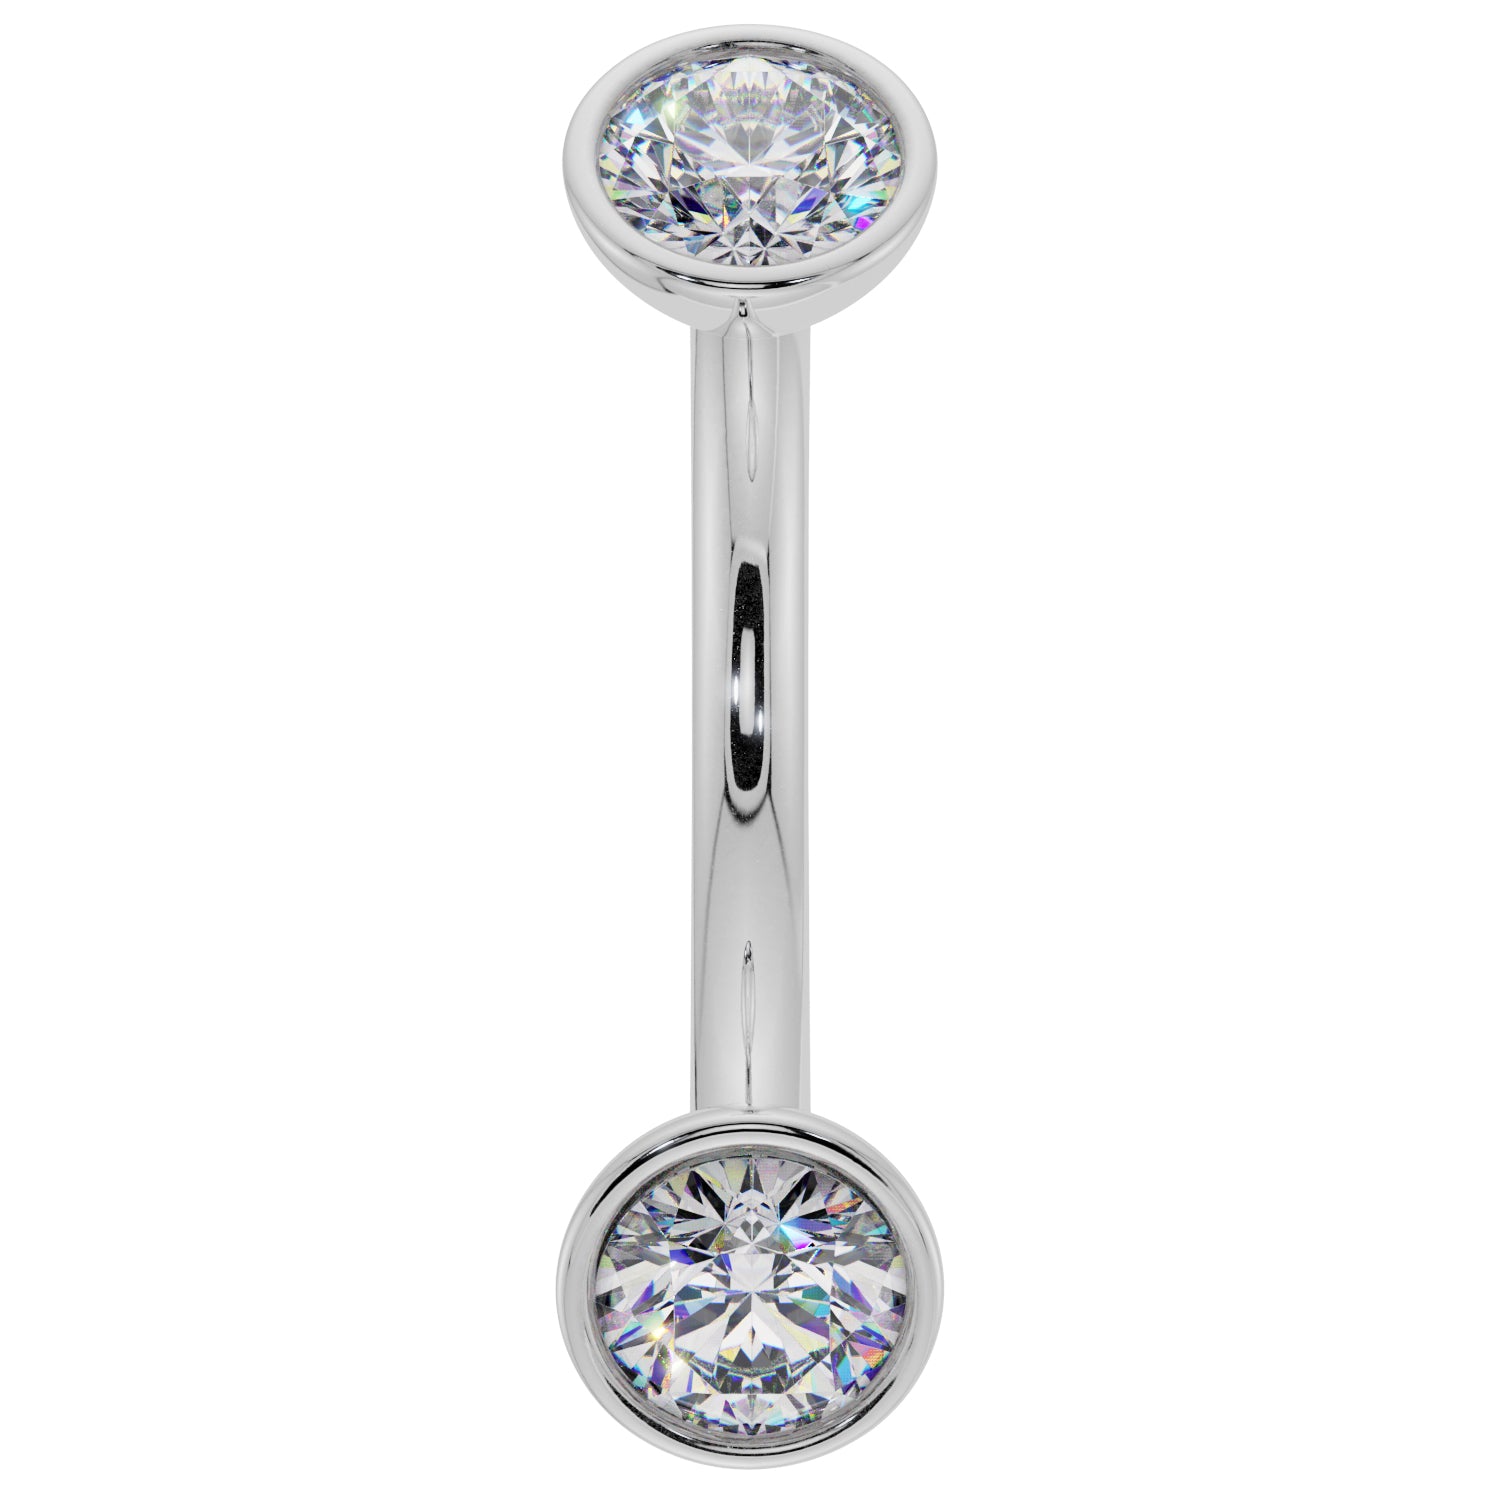 Dainty Diamond Bezel-Set Curved Barbell for Eyebrow Rook Belly-14K White Gold   14G (1.6mm)   7 16